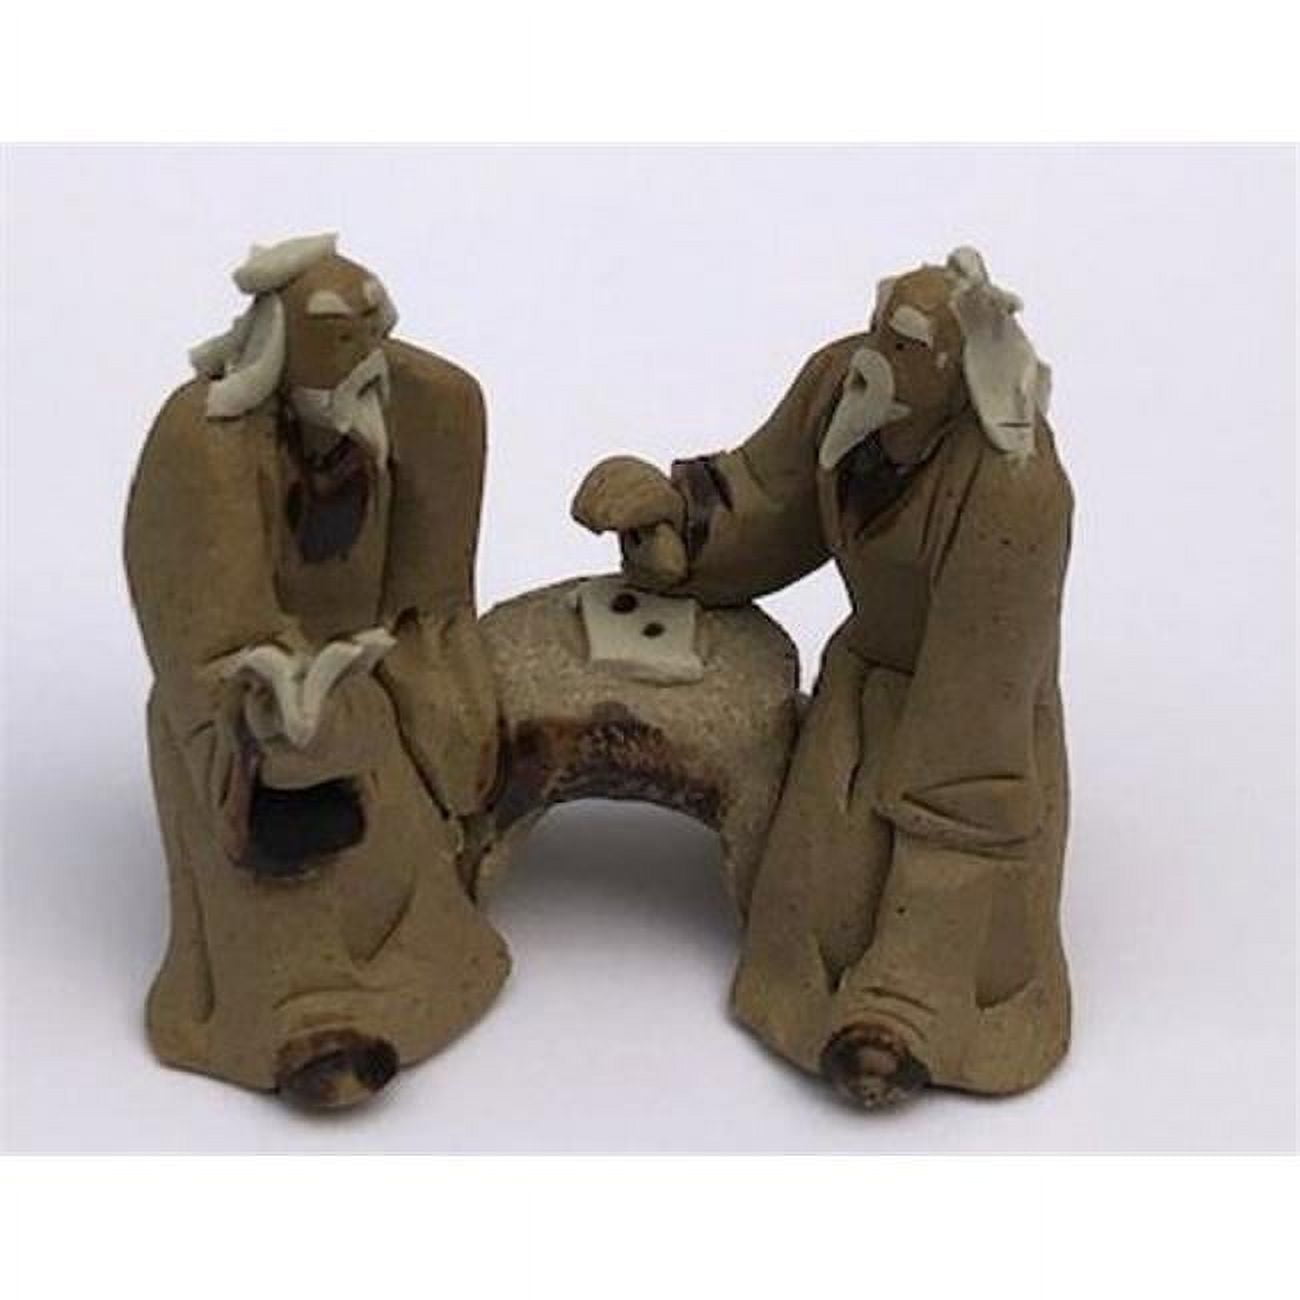 Picture of Bonsai Boy of New York e3512 2 in. Two Mud Men Sitting on a Bench Reading Book Ceramic Figurine